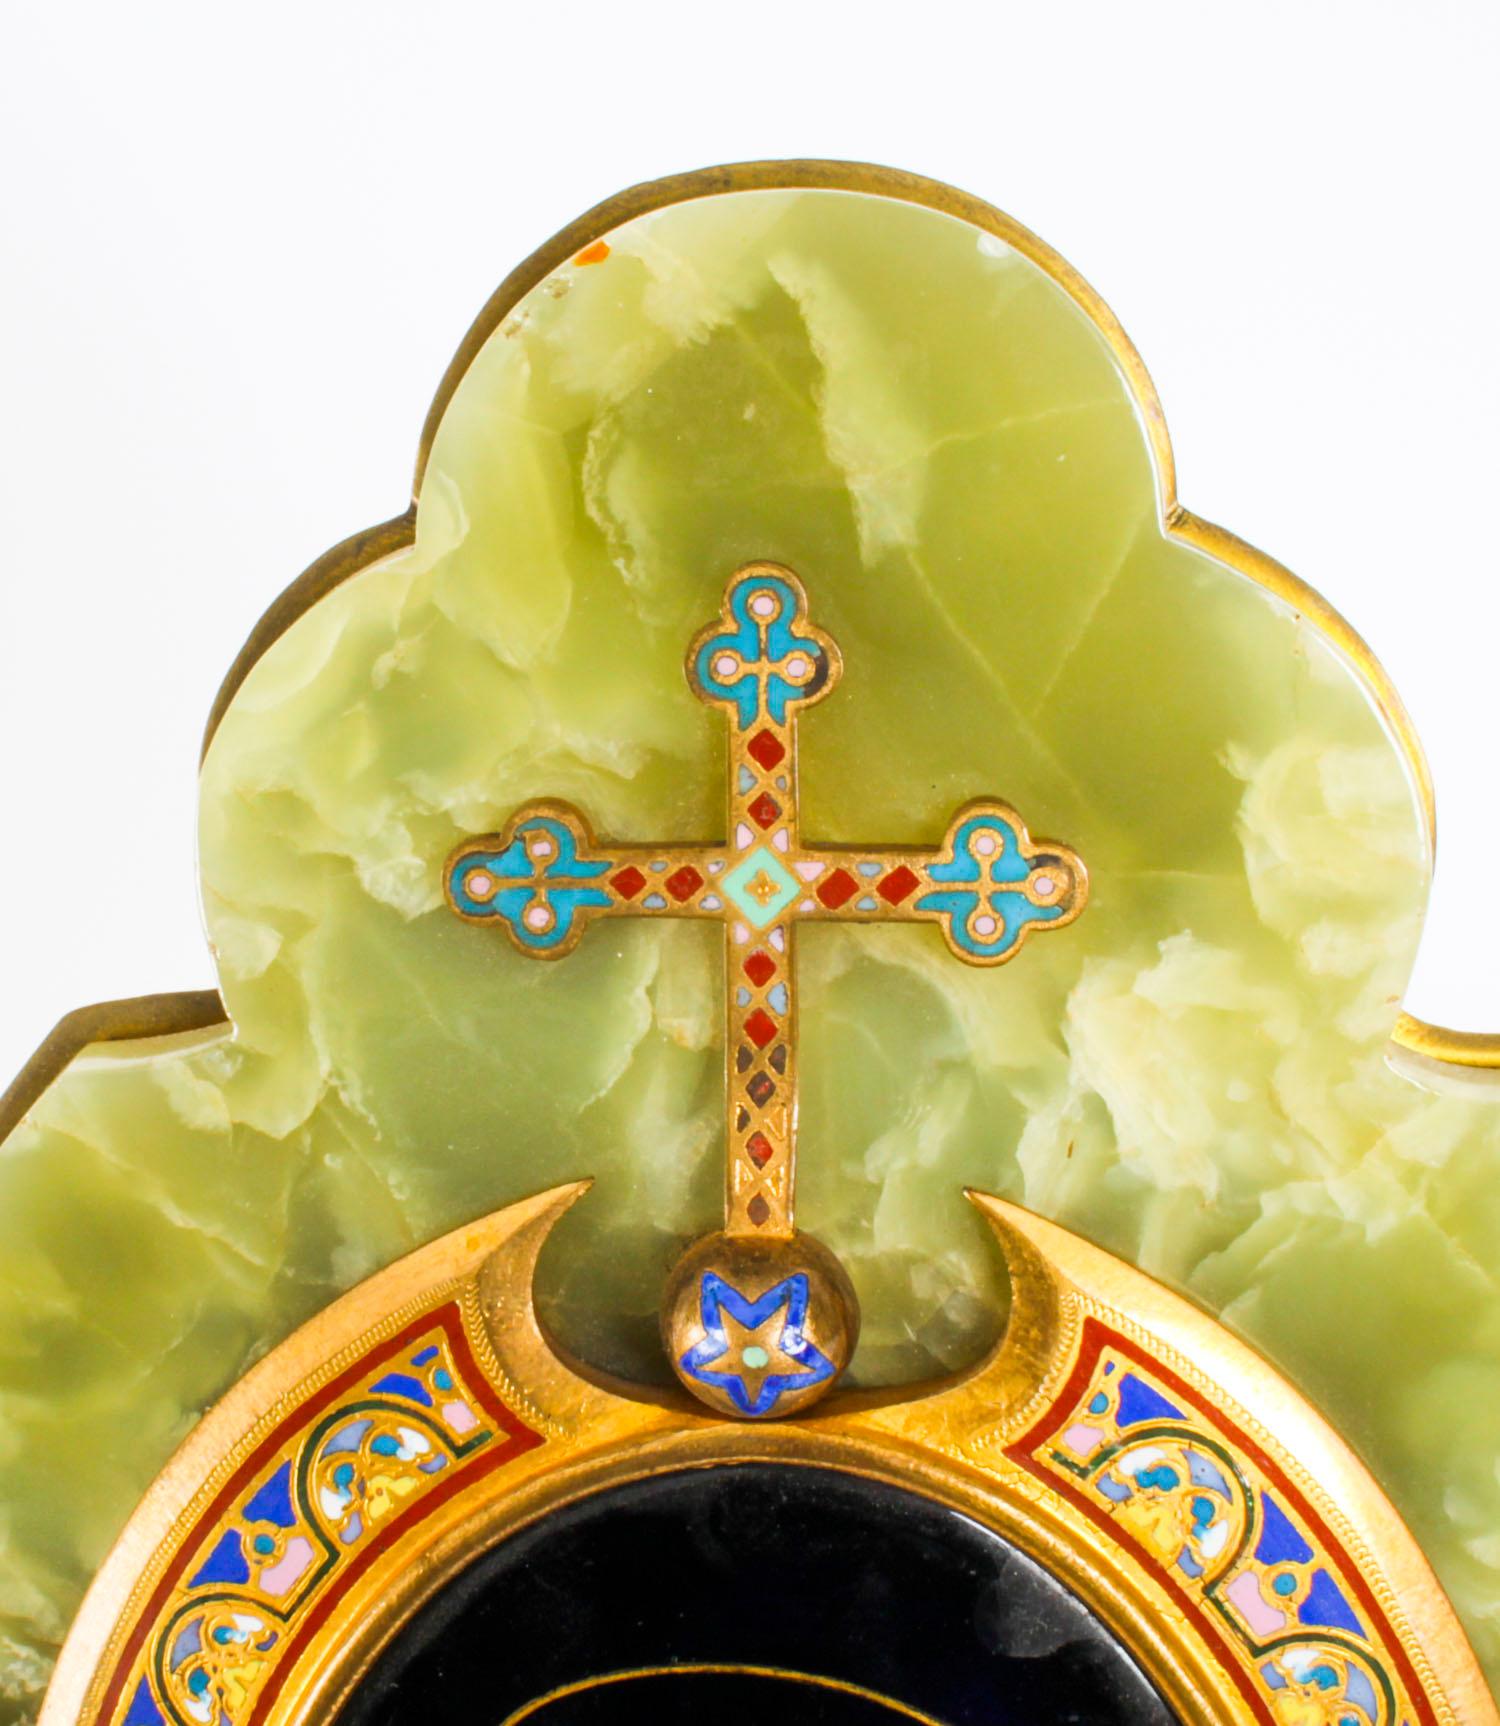 This is a beautiful large champleve enamel and ormolu decorated onyx wall hanging holy water stoop, late 19th century in date.

The shaped onyx is mounted on an ormolu base, the champleve enamel is decorated in royal blue, pink and red and is